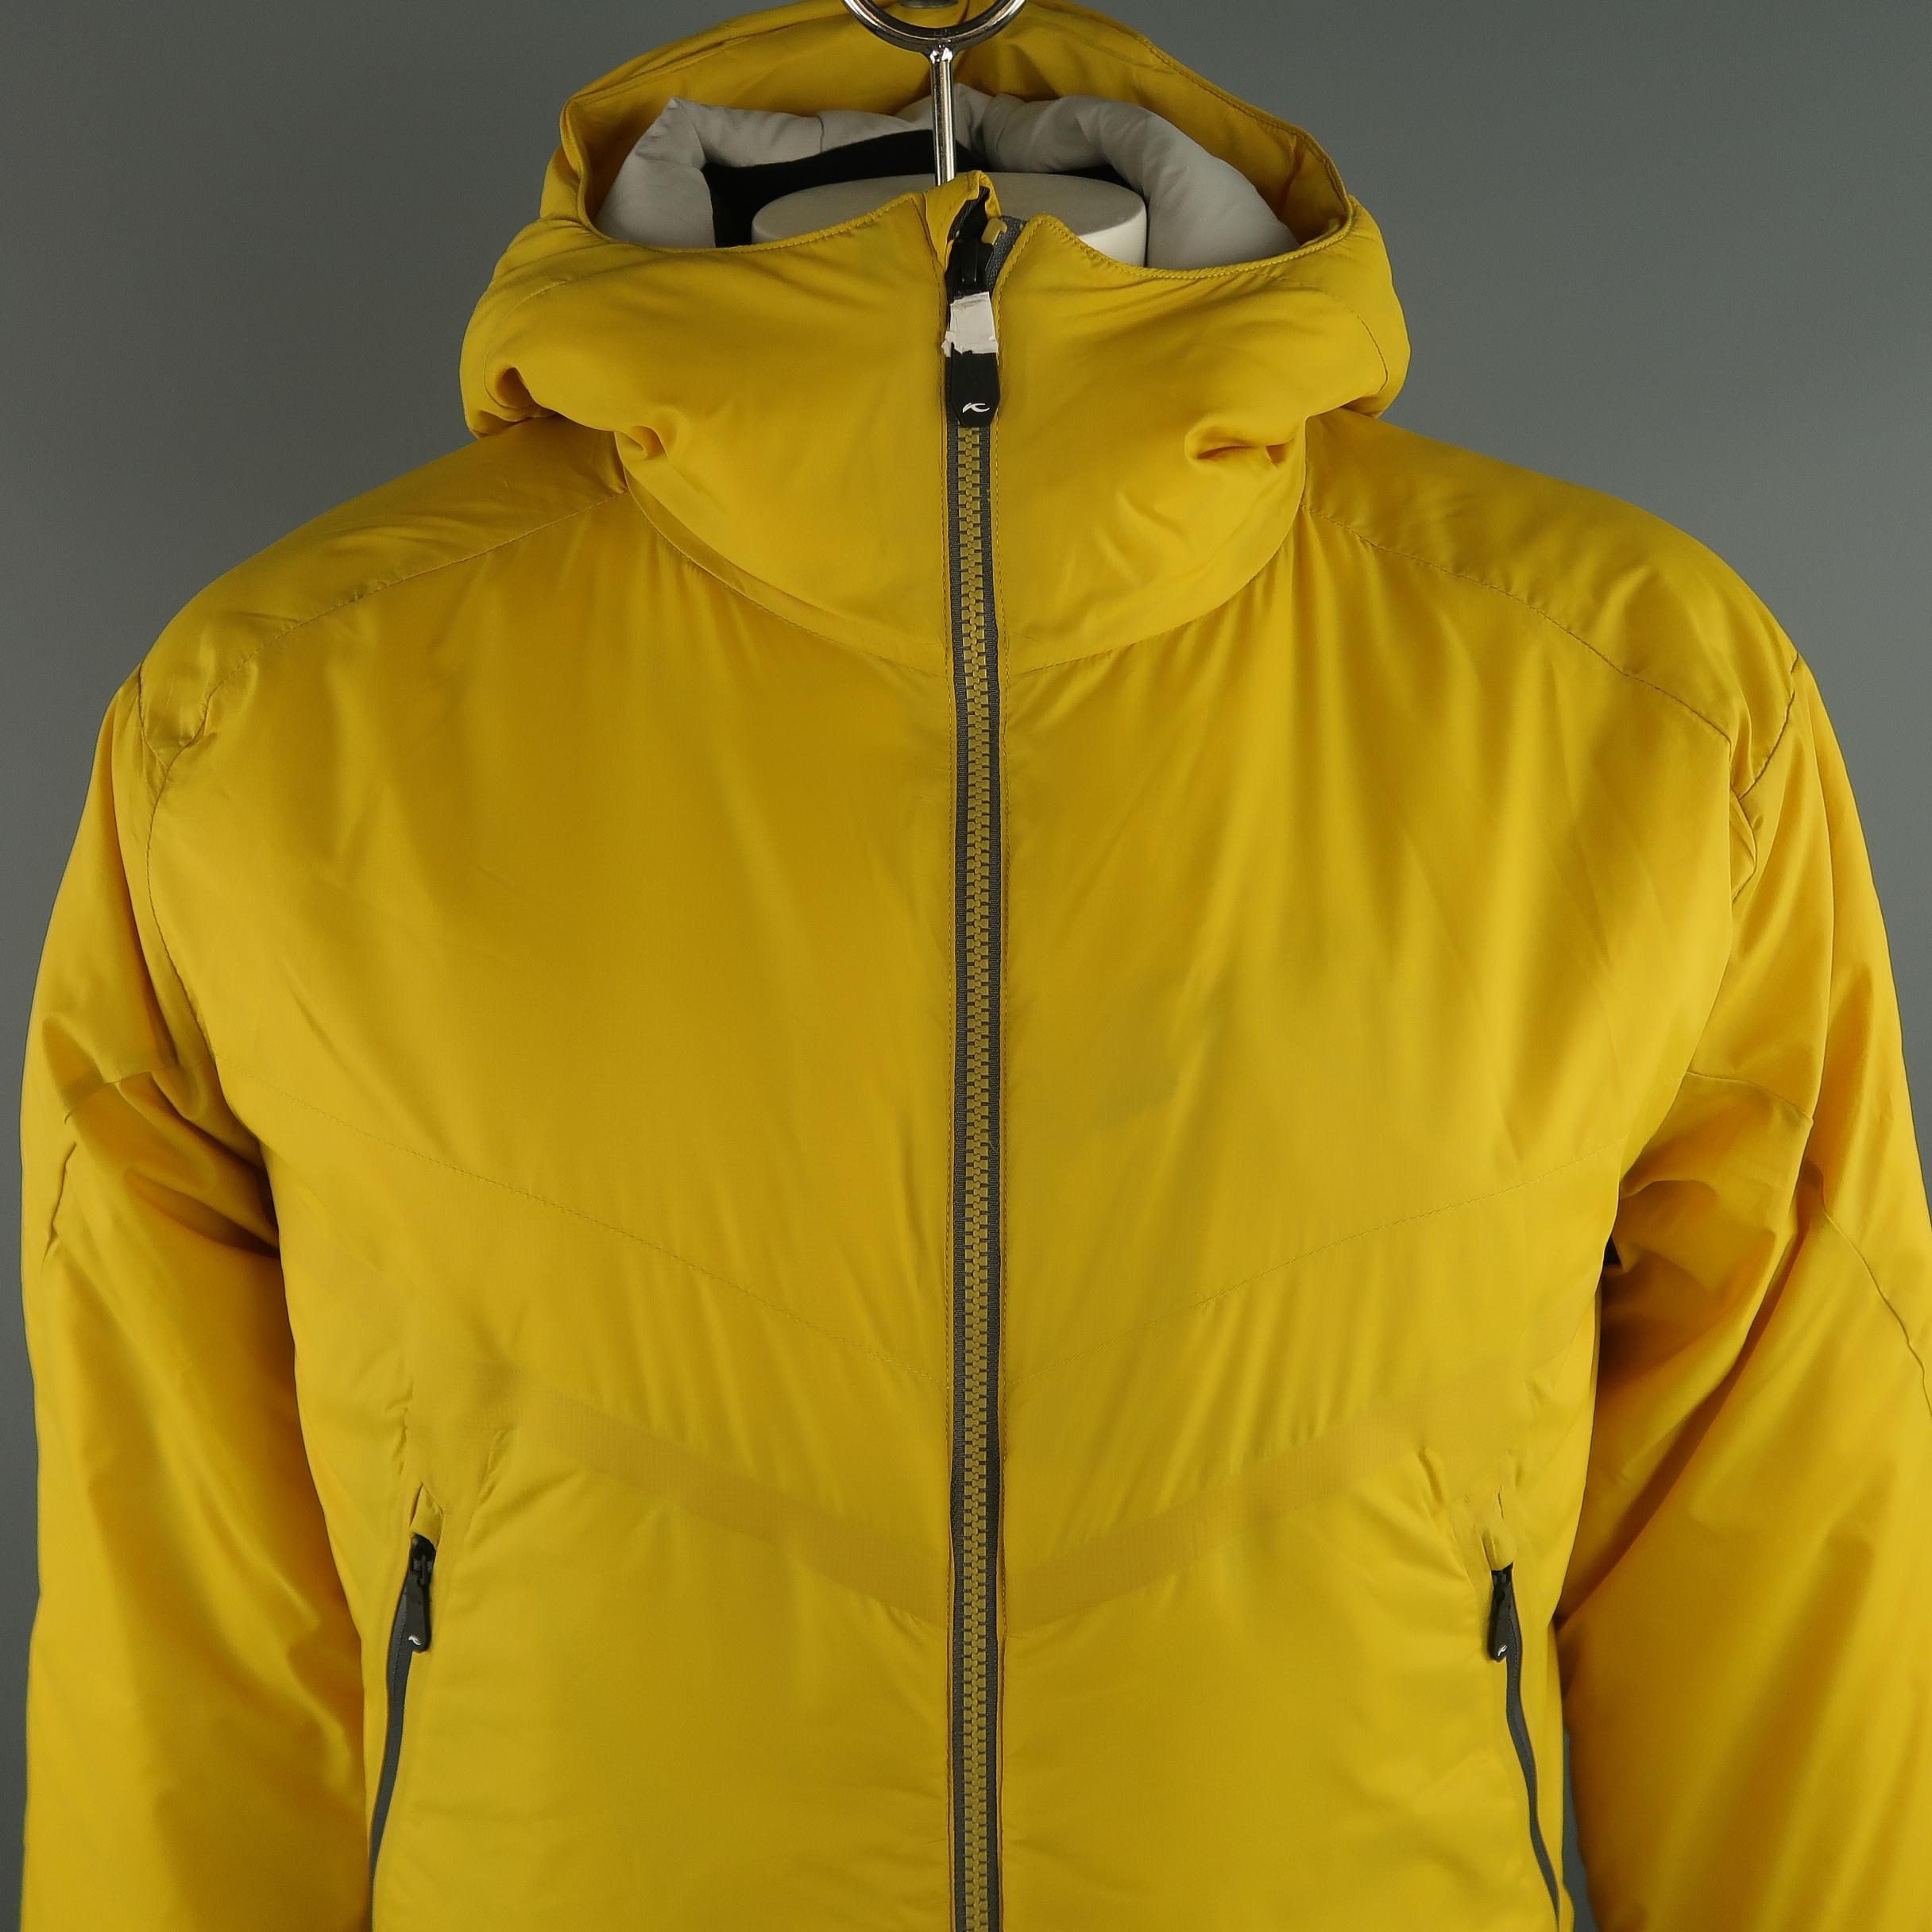 KJUS  filled hooded  jacket comes in a light weight yellow tone in polyamide solid material, zip up, slit pockets. Made in Italy.
 
New without Tags.
Marked: 52 / L  
 
Measurements:
 
Shoulder: 20 in.
Chest: 46 in.
Sleeve: 27 in.
Length: 30 in.